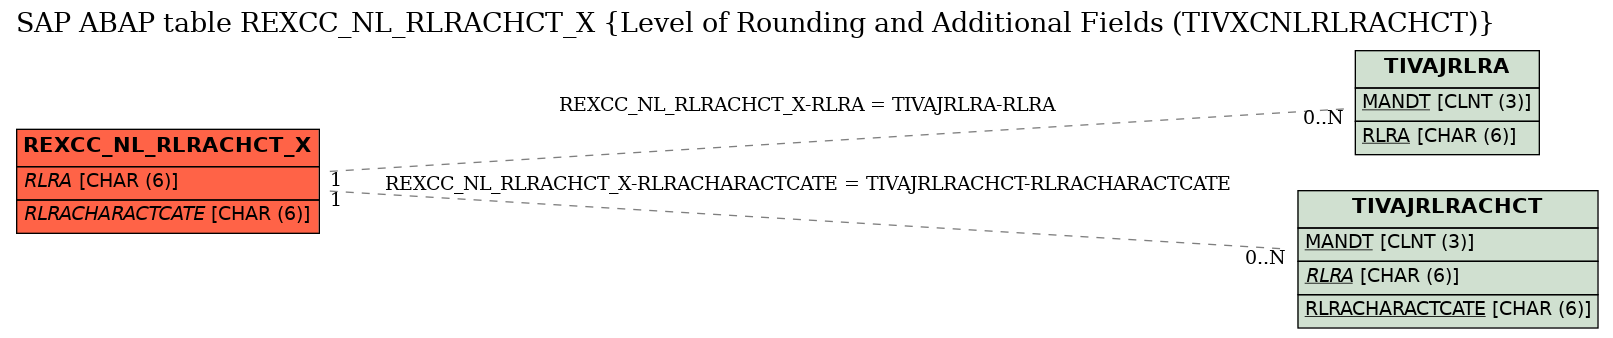 E-R Diagram for table REXCC_NL_RLRACHCT_X (Level of Rounding and Additional Fields (TIVXCNLRLRACHCT))